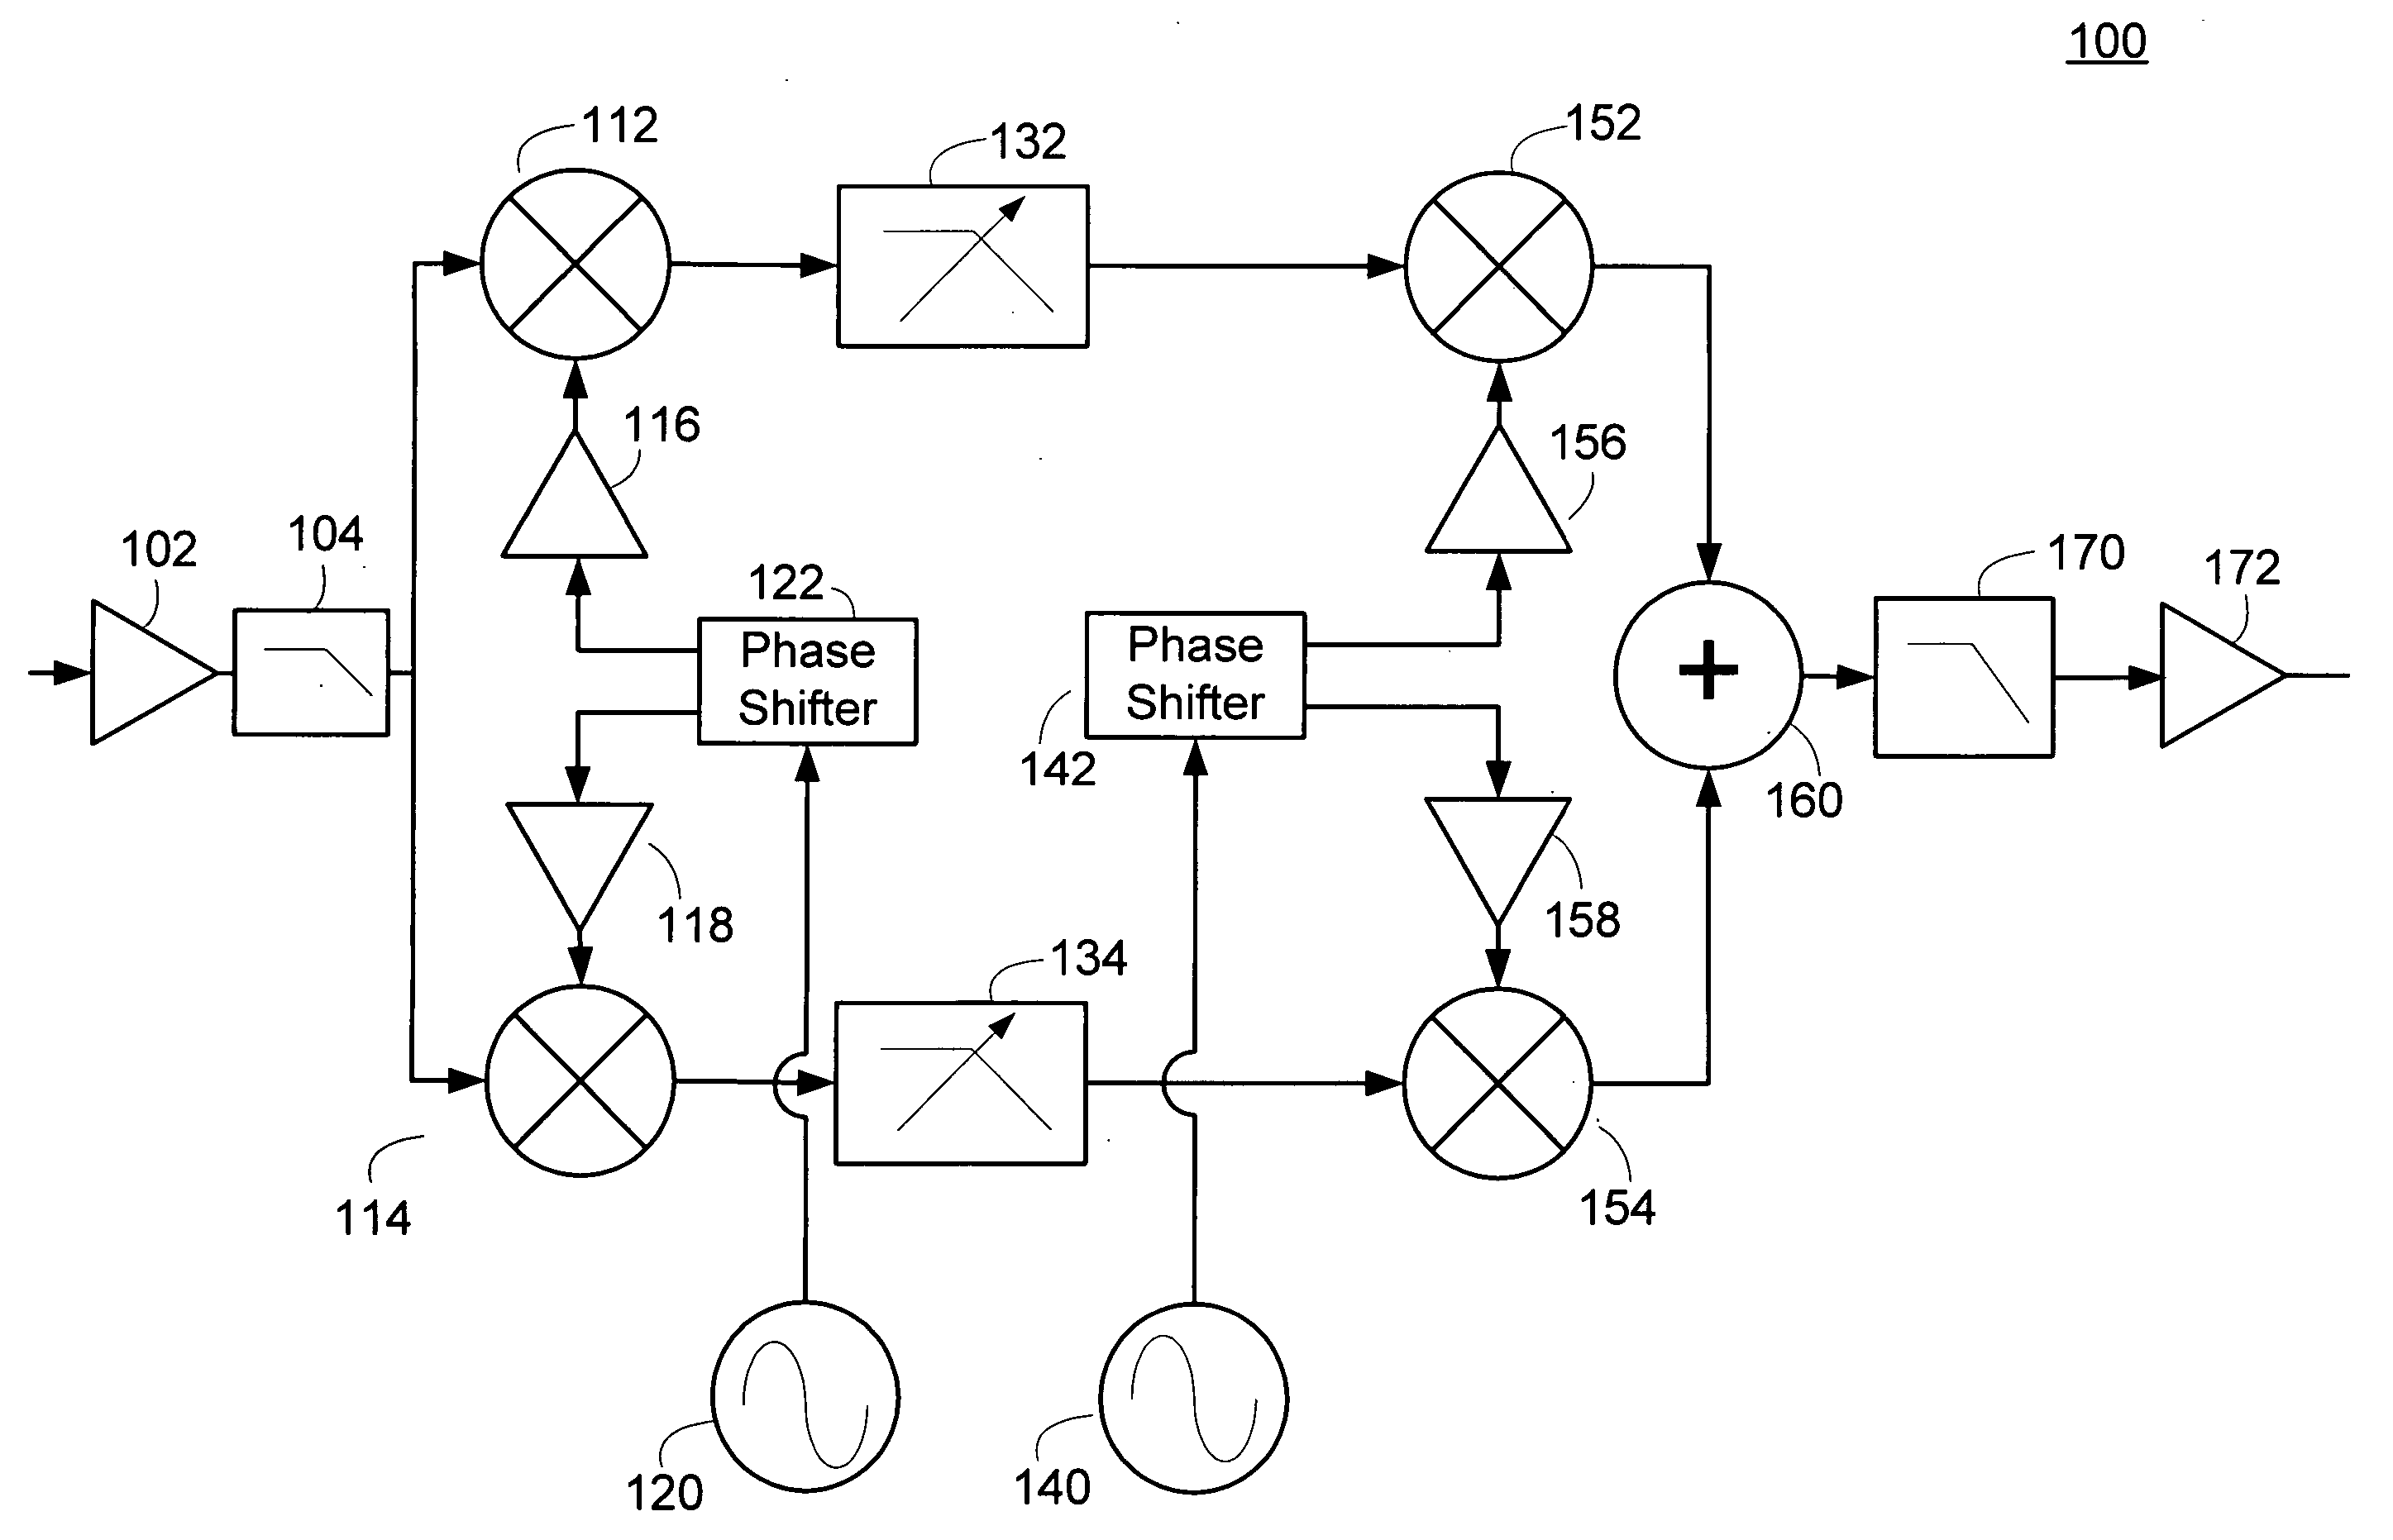 Harmonic reject receiver architecture and mixer